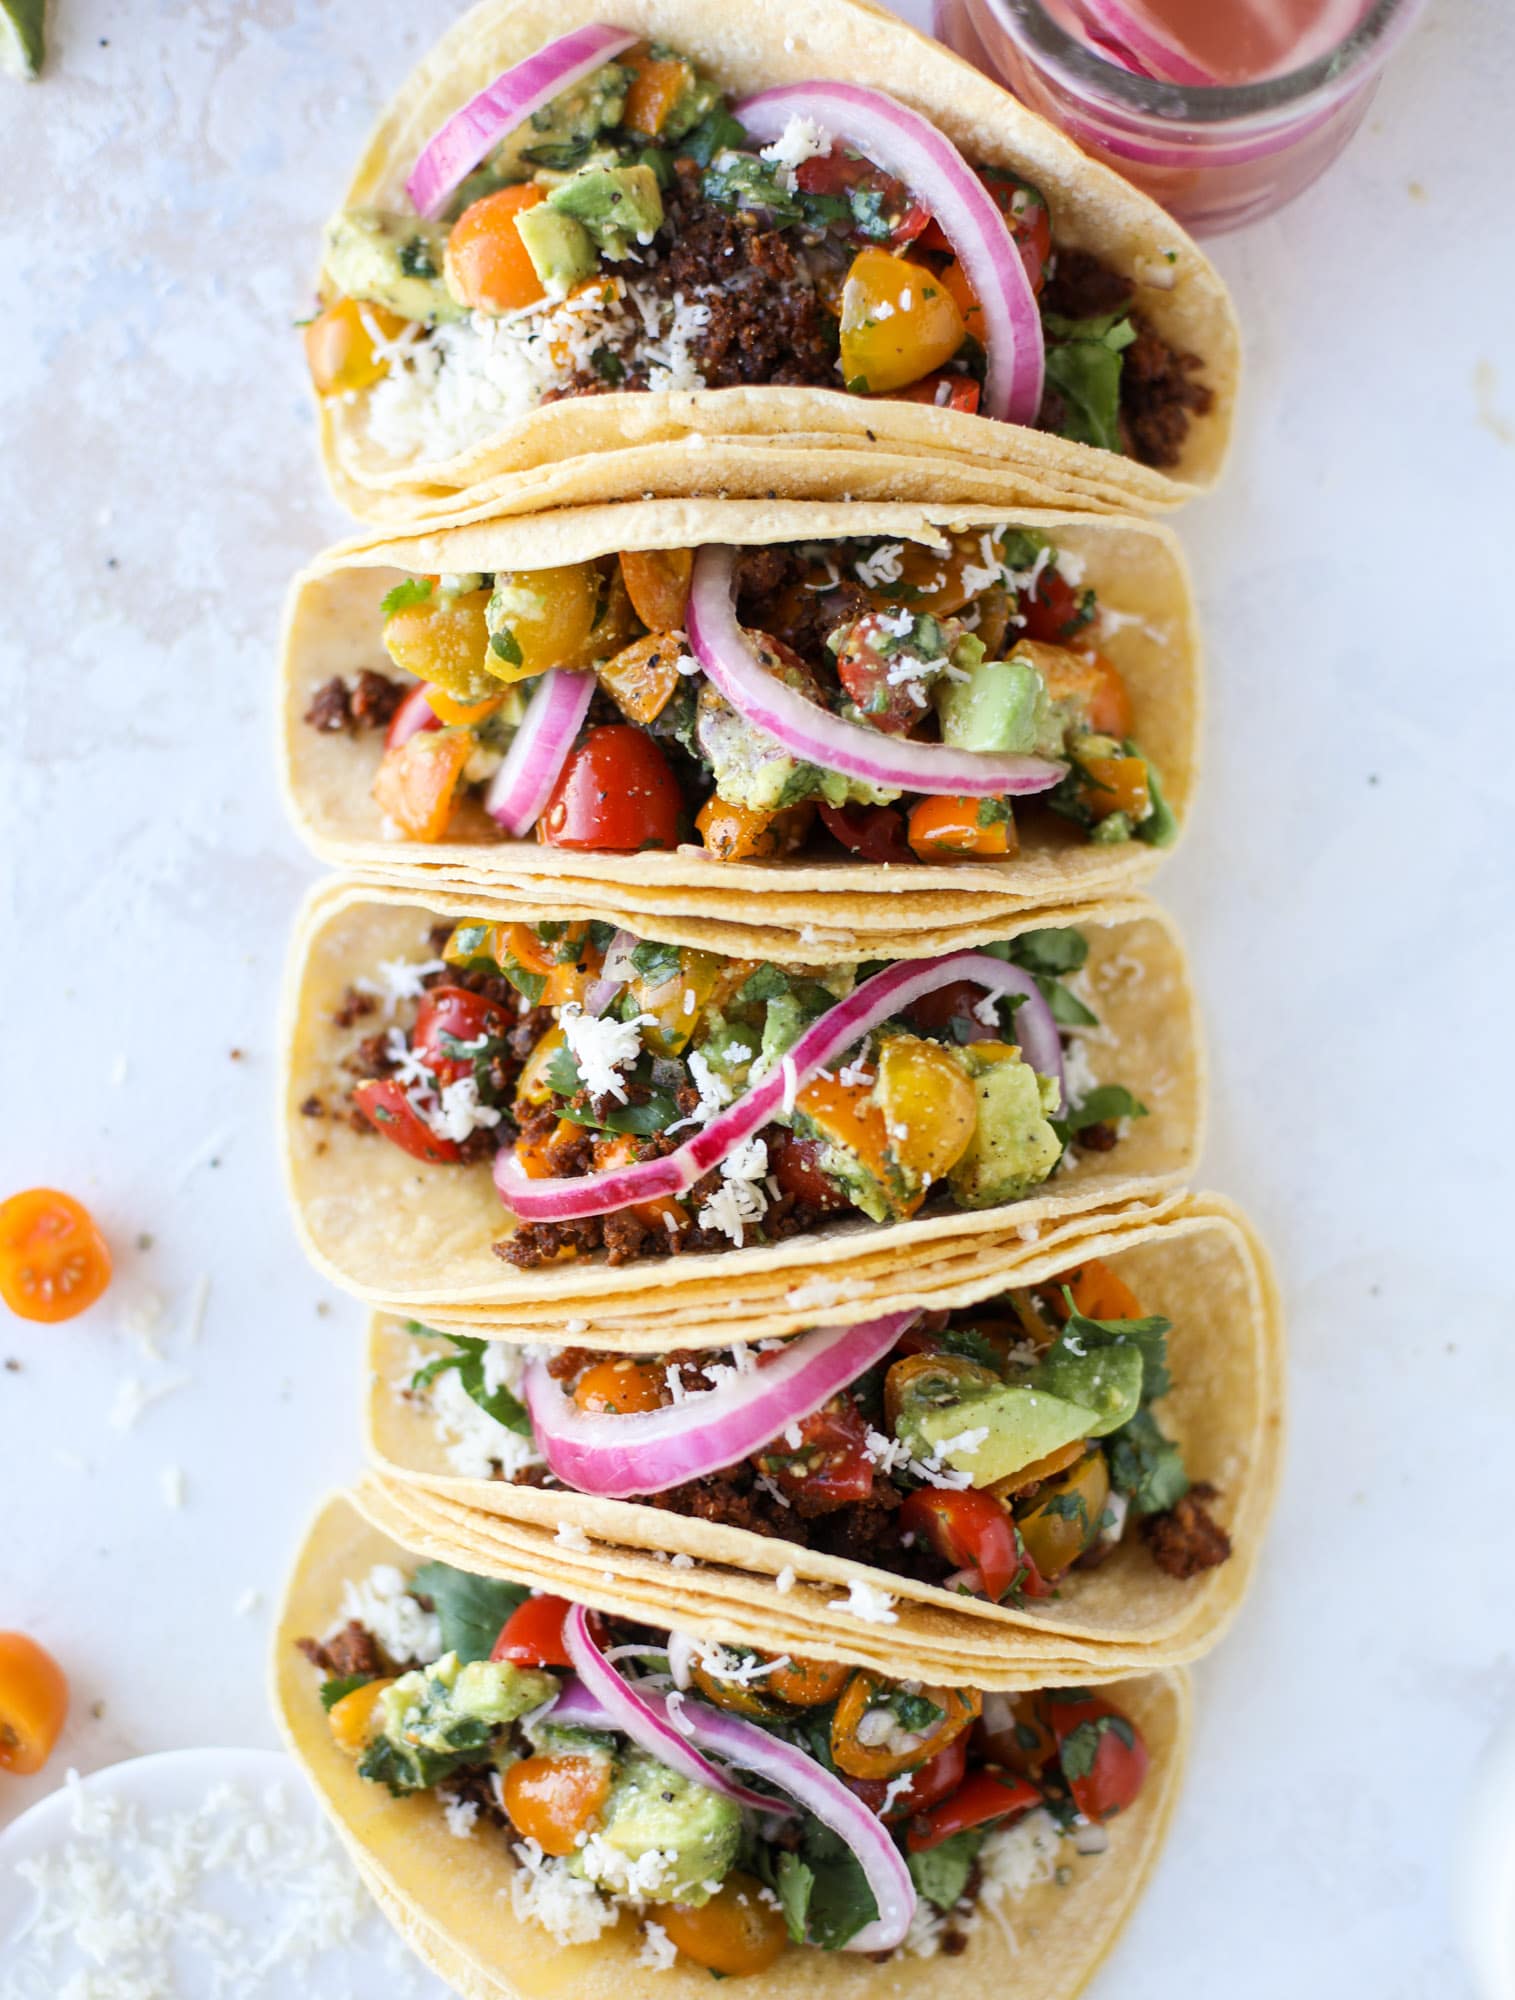 Ground Beef Tacos - Our Favorite Ground Beef Tacos